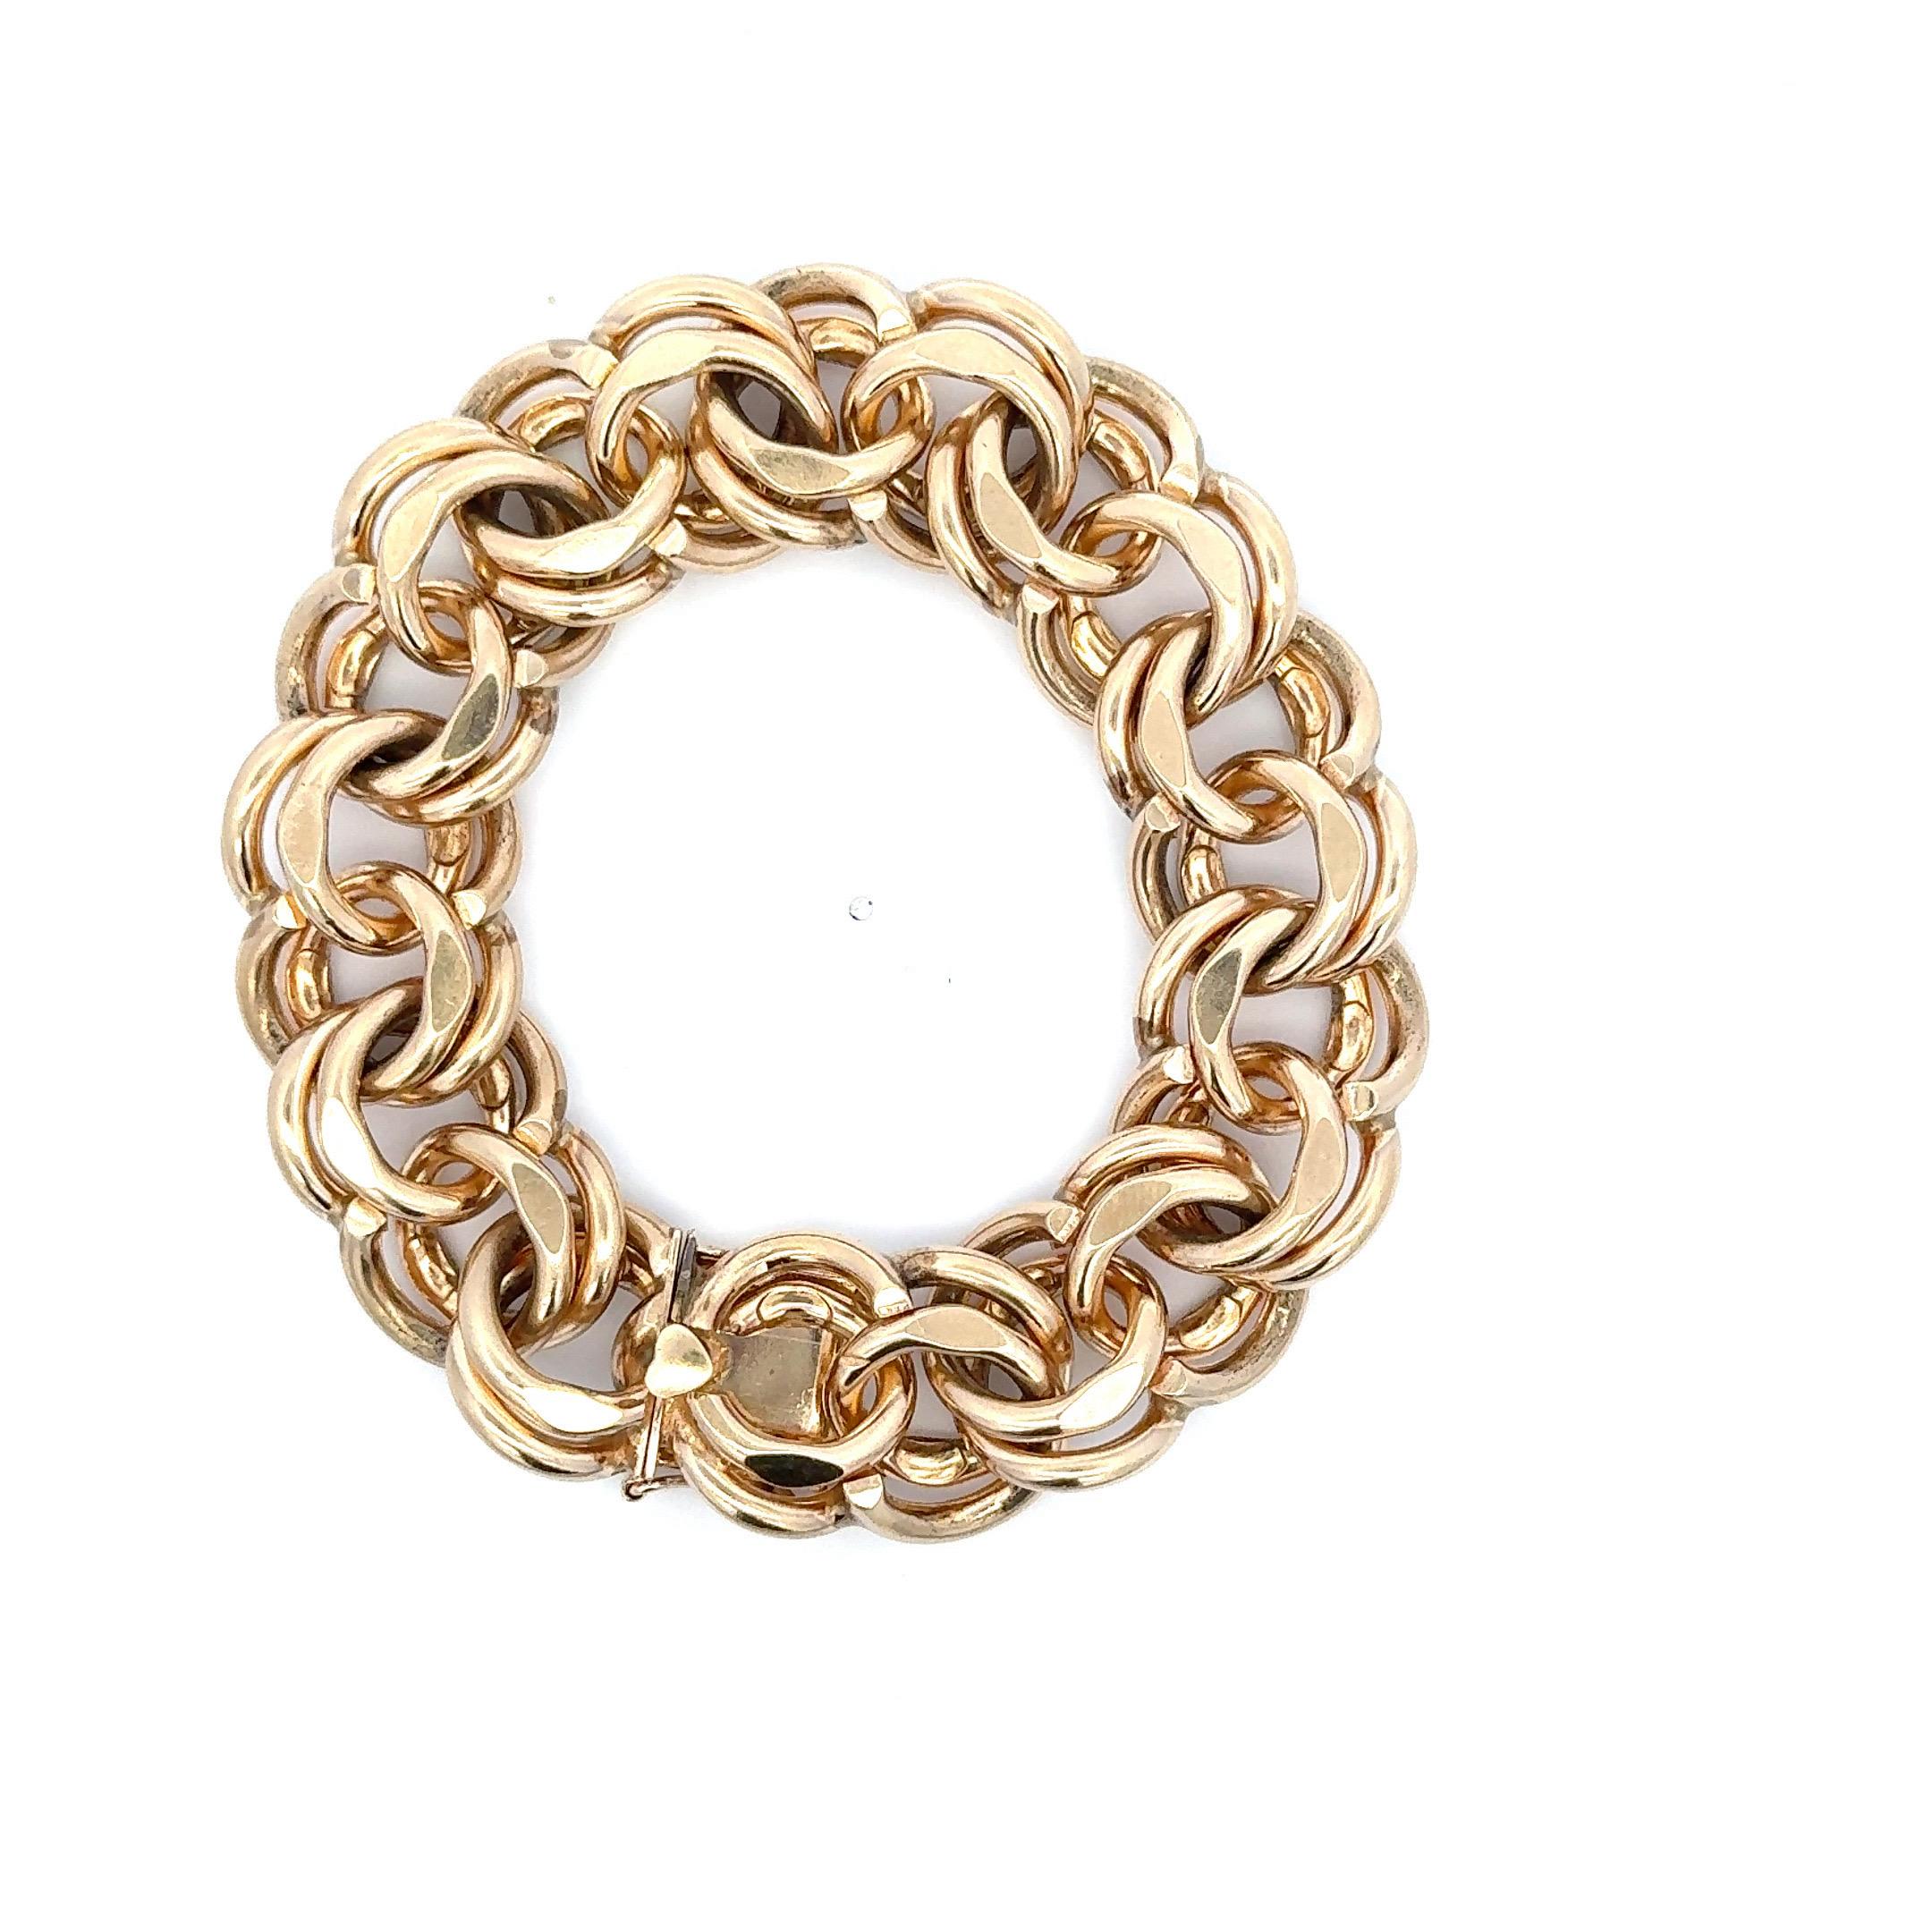 Heavy Double Link Charm Bracelet 112 Grams 14 Karat Yellow Gold 8 Inches In Excellent Condition For Sale In New York, NY